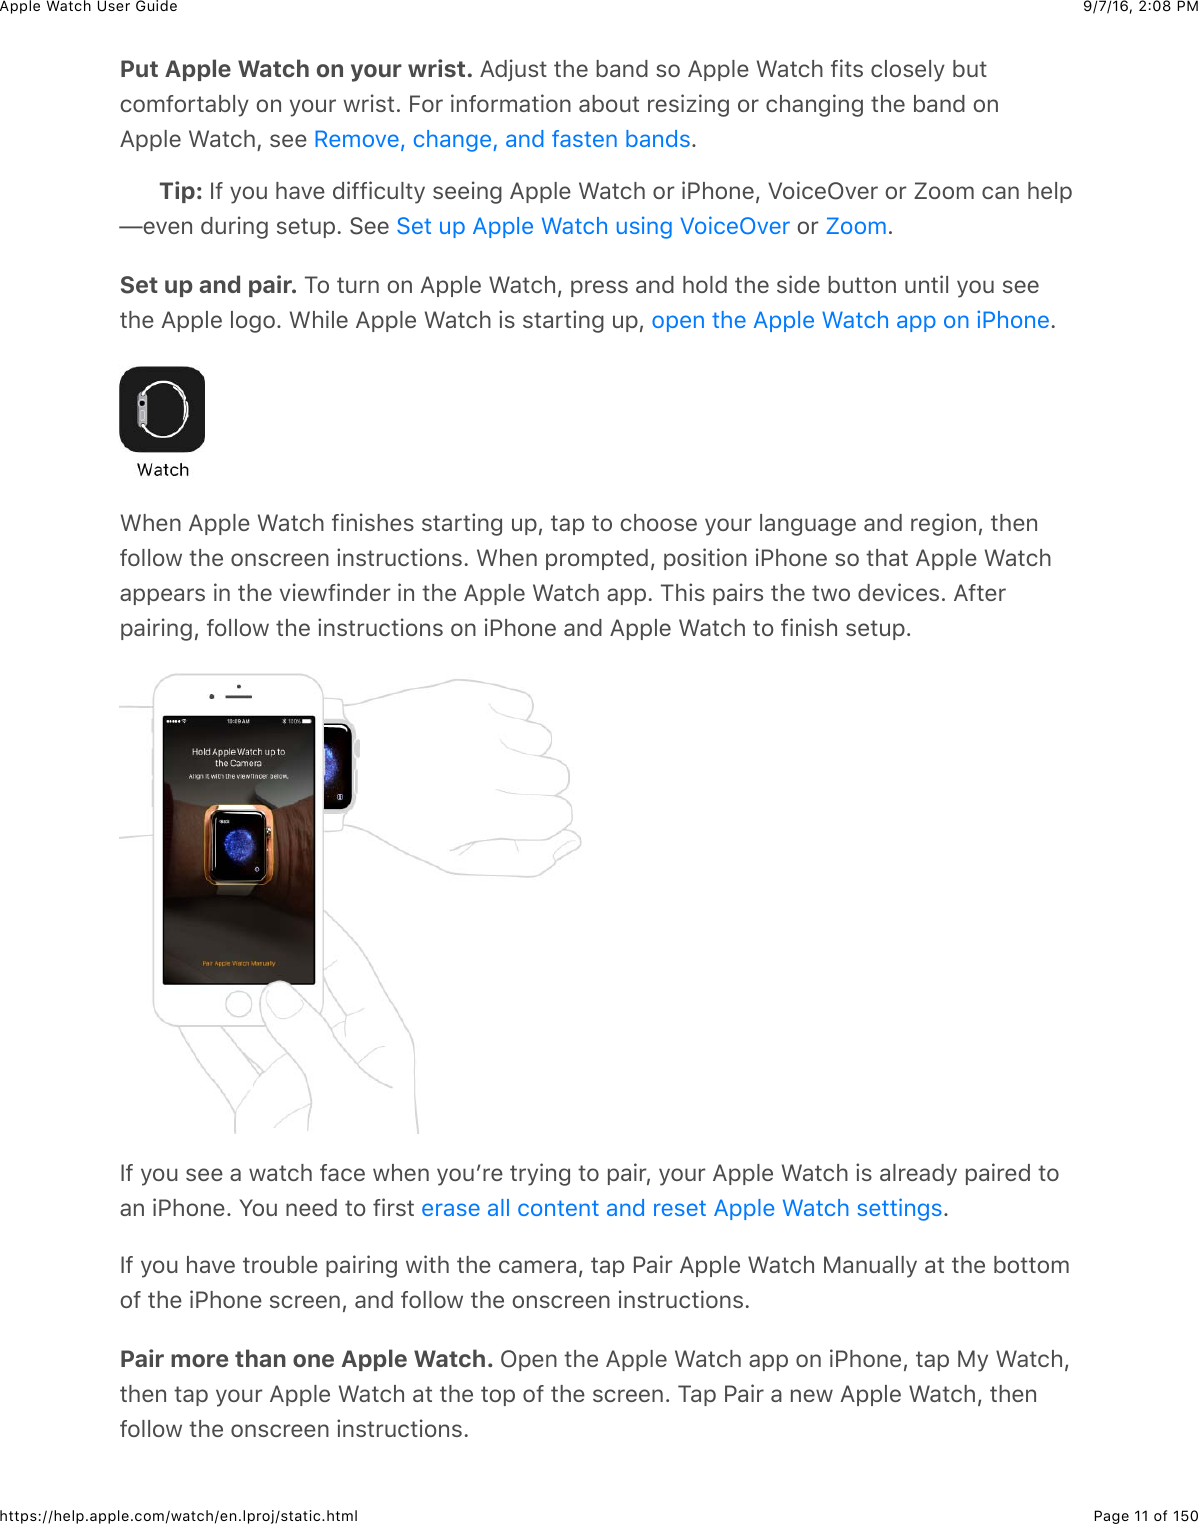 9/7/16, 2)08 PMApple Watch User GuidePage 11 of 150https://help.apple.com/watch/en.lproj/static.htmlPut Apple Watch on your wrist. =0O4$3&amp;3)%&amp;B&apos;,0&amp;$#&amp;=22&quot;%&amp;&gt;&apos;3()&amp;@+3$&amp;(&quot;#$%&quot;/&amp;B43(#5@#*3&apos;B&quot;/&amp;#,&amp;/#4*&amp;7*+$3C&amp;E#*&amp;+,@#*5&apos;3+#,&amp;&apos;B#43&amp;*%$+N+,-&amp;#*&amp;()&apos;,-+,-&amp;3)%&amp;B&apos;,0&amp;#,=22&quot;%&amp;&gt;&apos;3()J&amp;$%%&amp; CTip: Y@&amp;/#4&amp;)&apos;.%&amp;0+@@+(4&quot;3/&amp;$%%+,-&amp;=22&quot;%&amp;&gt;&apos;3()&amp;#*&amp;+G)#,%J&amp;_#+(%L.%*&amp;#*&amp;`##5&amp;(&apos;,&amp;)%&quot;2T%.%,&amp;04*+,-&amp;$%342C&amp;6%%&amp; &amp;#*&amp; CSet up and pair. 1#&amp;34*,&amp;#,&amp;=22&quot;%&amp;&gt;&apos;3()J&amp;2*%$$&amp;&apos;,0&amp;)#&quot;0&amp;3)%&amp;$+0%&amp;B433#,&amp;4,3+&quot;&amp;/#4&amp;$%%3)%&amp;=22&quot;%&amp;&quot;#-#C&amp;&gt;)+&quot;%&amp;=22&quot;%&amp;&gt;&apos;3()&amp;+$&amp;$3&apos;*3+,-&amp;42J&amp; C&gt;)%,&amp;=22&quot;%&amp;&gt;&apos;3()&amp;@+,+$)%$&amp;$3&apos;*3+,-&amp;42J&amp;3&apos;2&amp;3#&amp;()##$%&amp;/#4*&amp;&quot;&apos;,-4&apos;-%&amp;&apos;,0&amp;*%-+#,J&amp;3)%,@#&quot;&quot;#7&amp;3)%&amp;#,$(*%%,&amp;+,$3*4(3+#,$C&amp;&gt;)%,&amp;2*#523%0J&amp;2#$+3+#,&amp;+G)#,%&amp;$#&amp;3)&apos;3&amp;=22&quot;%&amp;&gt;&apos;3()&apos;22%&apos;*$&amp;+,&amp;3)%&amp;.+%7@+,0%*&amp;+,&amp;3)%&amp;=22&quot;%&amp;&gt;&apos;3()&amp;&apos;22C&amp;1)+$&amp;2&apos;+*$&amp;3)%&amp;37#&amp;0%.+(%$C&amp;=@3%*2&apos;+*+,-J&amp;@#&quot;&quot;#7&amp;3)%&amp;+,$3*4(3+#,$&amp;#,&amp;+G)#,%&amp;&apos;,0&amp;=22&quot;%&amp;&gt;&apos;3()&amp;3#&amp;@+,+$)&amp;$%342CY@&amp;/#4&amp;$%%&amp;&apos;&amp;7&apos;3()&amp;@&apos;(%&amp;7)%,&amp;/#4W*%&amp;3*/+,-&amp;3#&amp;2&apos;+*J&amp;/#4*&amp;=22&quot;%&amp;&gt;&apos;3()&amp;+$&amp;&apos;&quot;*%&apos;0/&amp;2&apos;+*%0&amp;3#&apos;,&amp;+G)#,%C&amp;S#4&amp;,%%0&amp;3#&amp;@+*$3&amp; CY@&amp;/#4&amp;)&apos;.%&amp;3*#4B&quot;%&amp;2&apos;+*+,-&amp;7+3)&amp;3)%&amp;(&apos;5%*&apos;J&amp;3&apos;2&amp;G&apos;+*&amp;=22&quot;%&amp;&gt;&apos;3()&amp;F&apos;,4&apos;&quot;&quot;/&amp;&apos;3&amp;3)%&amp;B#33#5#@&amp;3)%&amp;+G)#,%&amp;$(*%%,J&amp;&apos;,0&amp;@#&quot;&quot;#7&amp;3)%&amp;#,$(*%%,&amp;+,$3*4(3+#,$CPair more than one Apple Watch. L2%,&amp;3)%&amp;=22&quot;%&amp;&gt;&apos;3()&amp;&apos;22&amp;#,&amp;+G)#,%J&amp;3&apos;2&amp;F/&amp;&gt;&apos;3()J3)%,&amp;3&apos;2&amp;/#4*&amp;=22&quot;%&amp;&gt;&apos;3()&amp;&apos;3&amp;3)%&amp;3#2&amp;#@&amp;3)%&amp;$(*%%,C&amp;1&apos;2&amp;G&apos;+*&amp;&apos;&amp;,%7&amp;=22&quot;%&amp;&gt;&apos;3()J&amp;3)%,@#&quot;&quot;#7&amp;3)%&amp;#,$(*%%,&amp;+,$3*4(3+#,$CH%5#.%J&amp;()&apos;,-%J&amp;&apos;,0&amp;@&apos;$3%,&amp;B&apos;,0$6%3&amp;42&amp;=22&quot;%&amp;&gt;&apos;3()&amp;4$+,-&amp;_#+(%L.%* `##5#2%,&amp;3)%&amp;=22&quot;%&amp;&gt;&apos;3()&amp;&apos;22&amp;#,&amp;+G)#,%%*&apos;$%&amp;&apos;&quot;&quot;&amp;(#,3%,3&amp;&apos;,0&amp;*%$%3&amp;=22&quot;%&amp;&gt;&apos;3()&amp;$%33+,-$